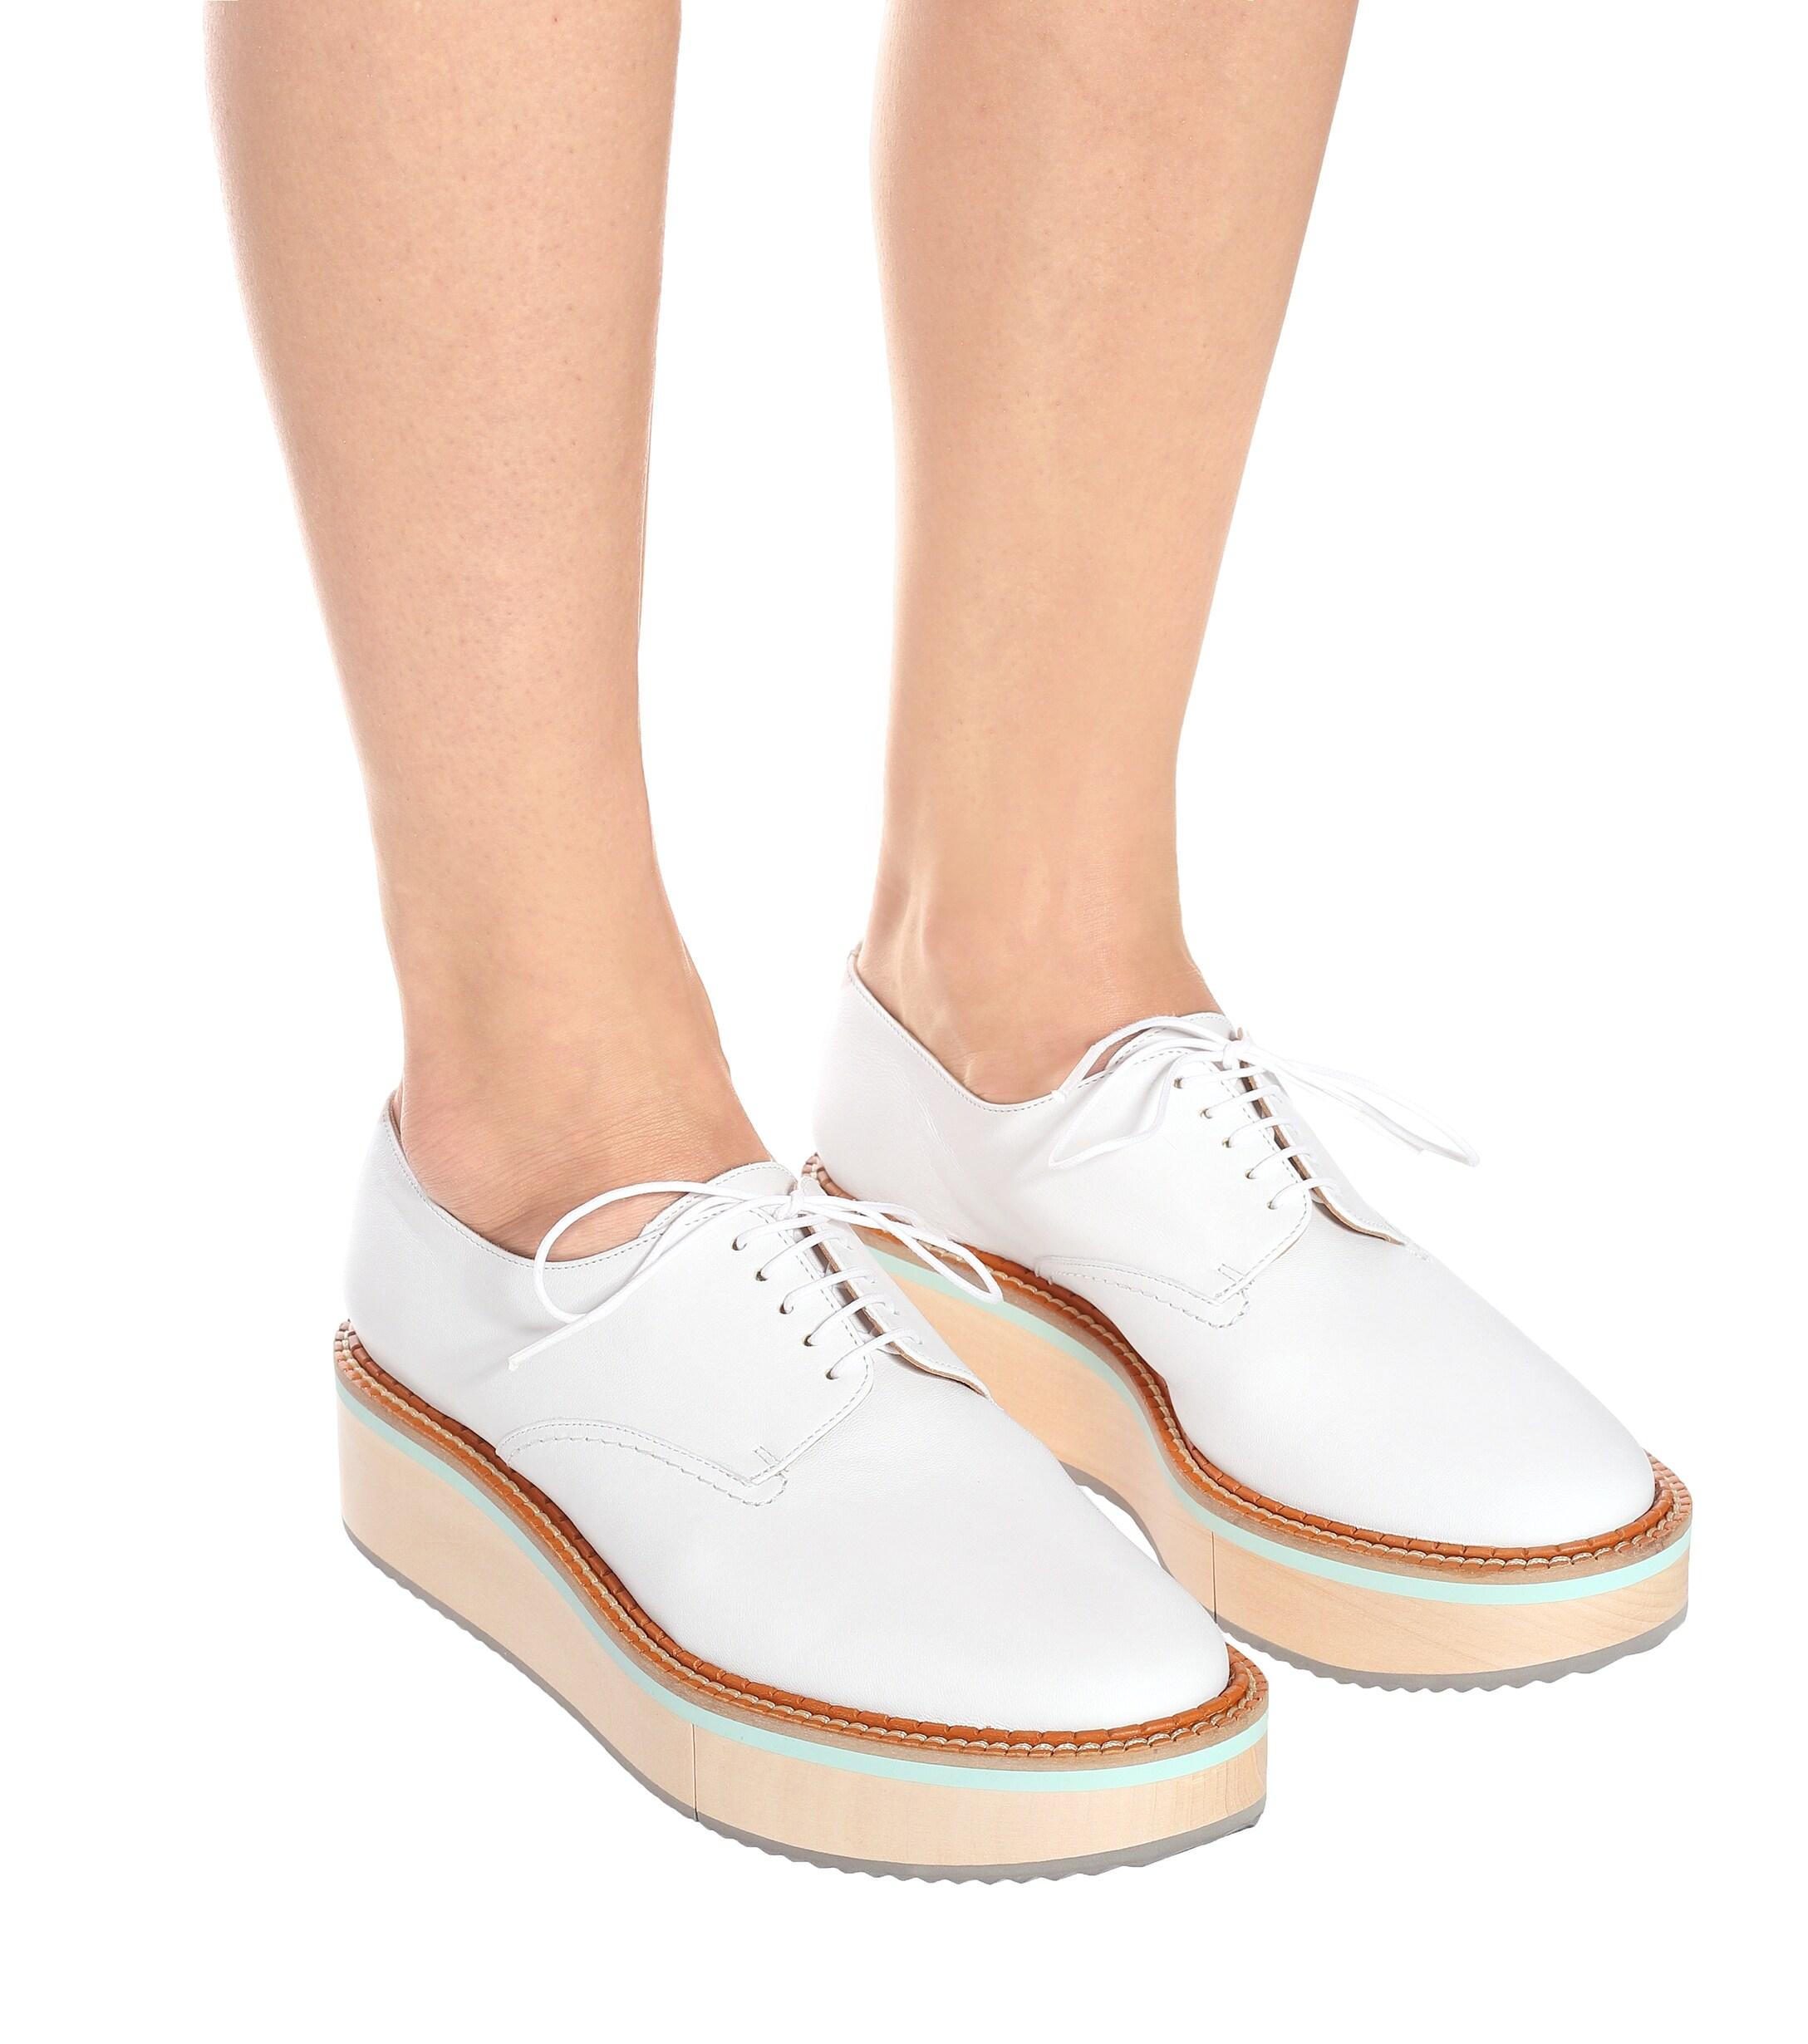 Robert Clergerie Brook Leather Shoes in White | Lyst